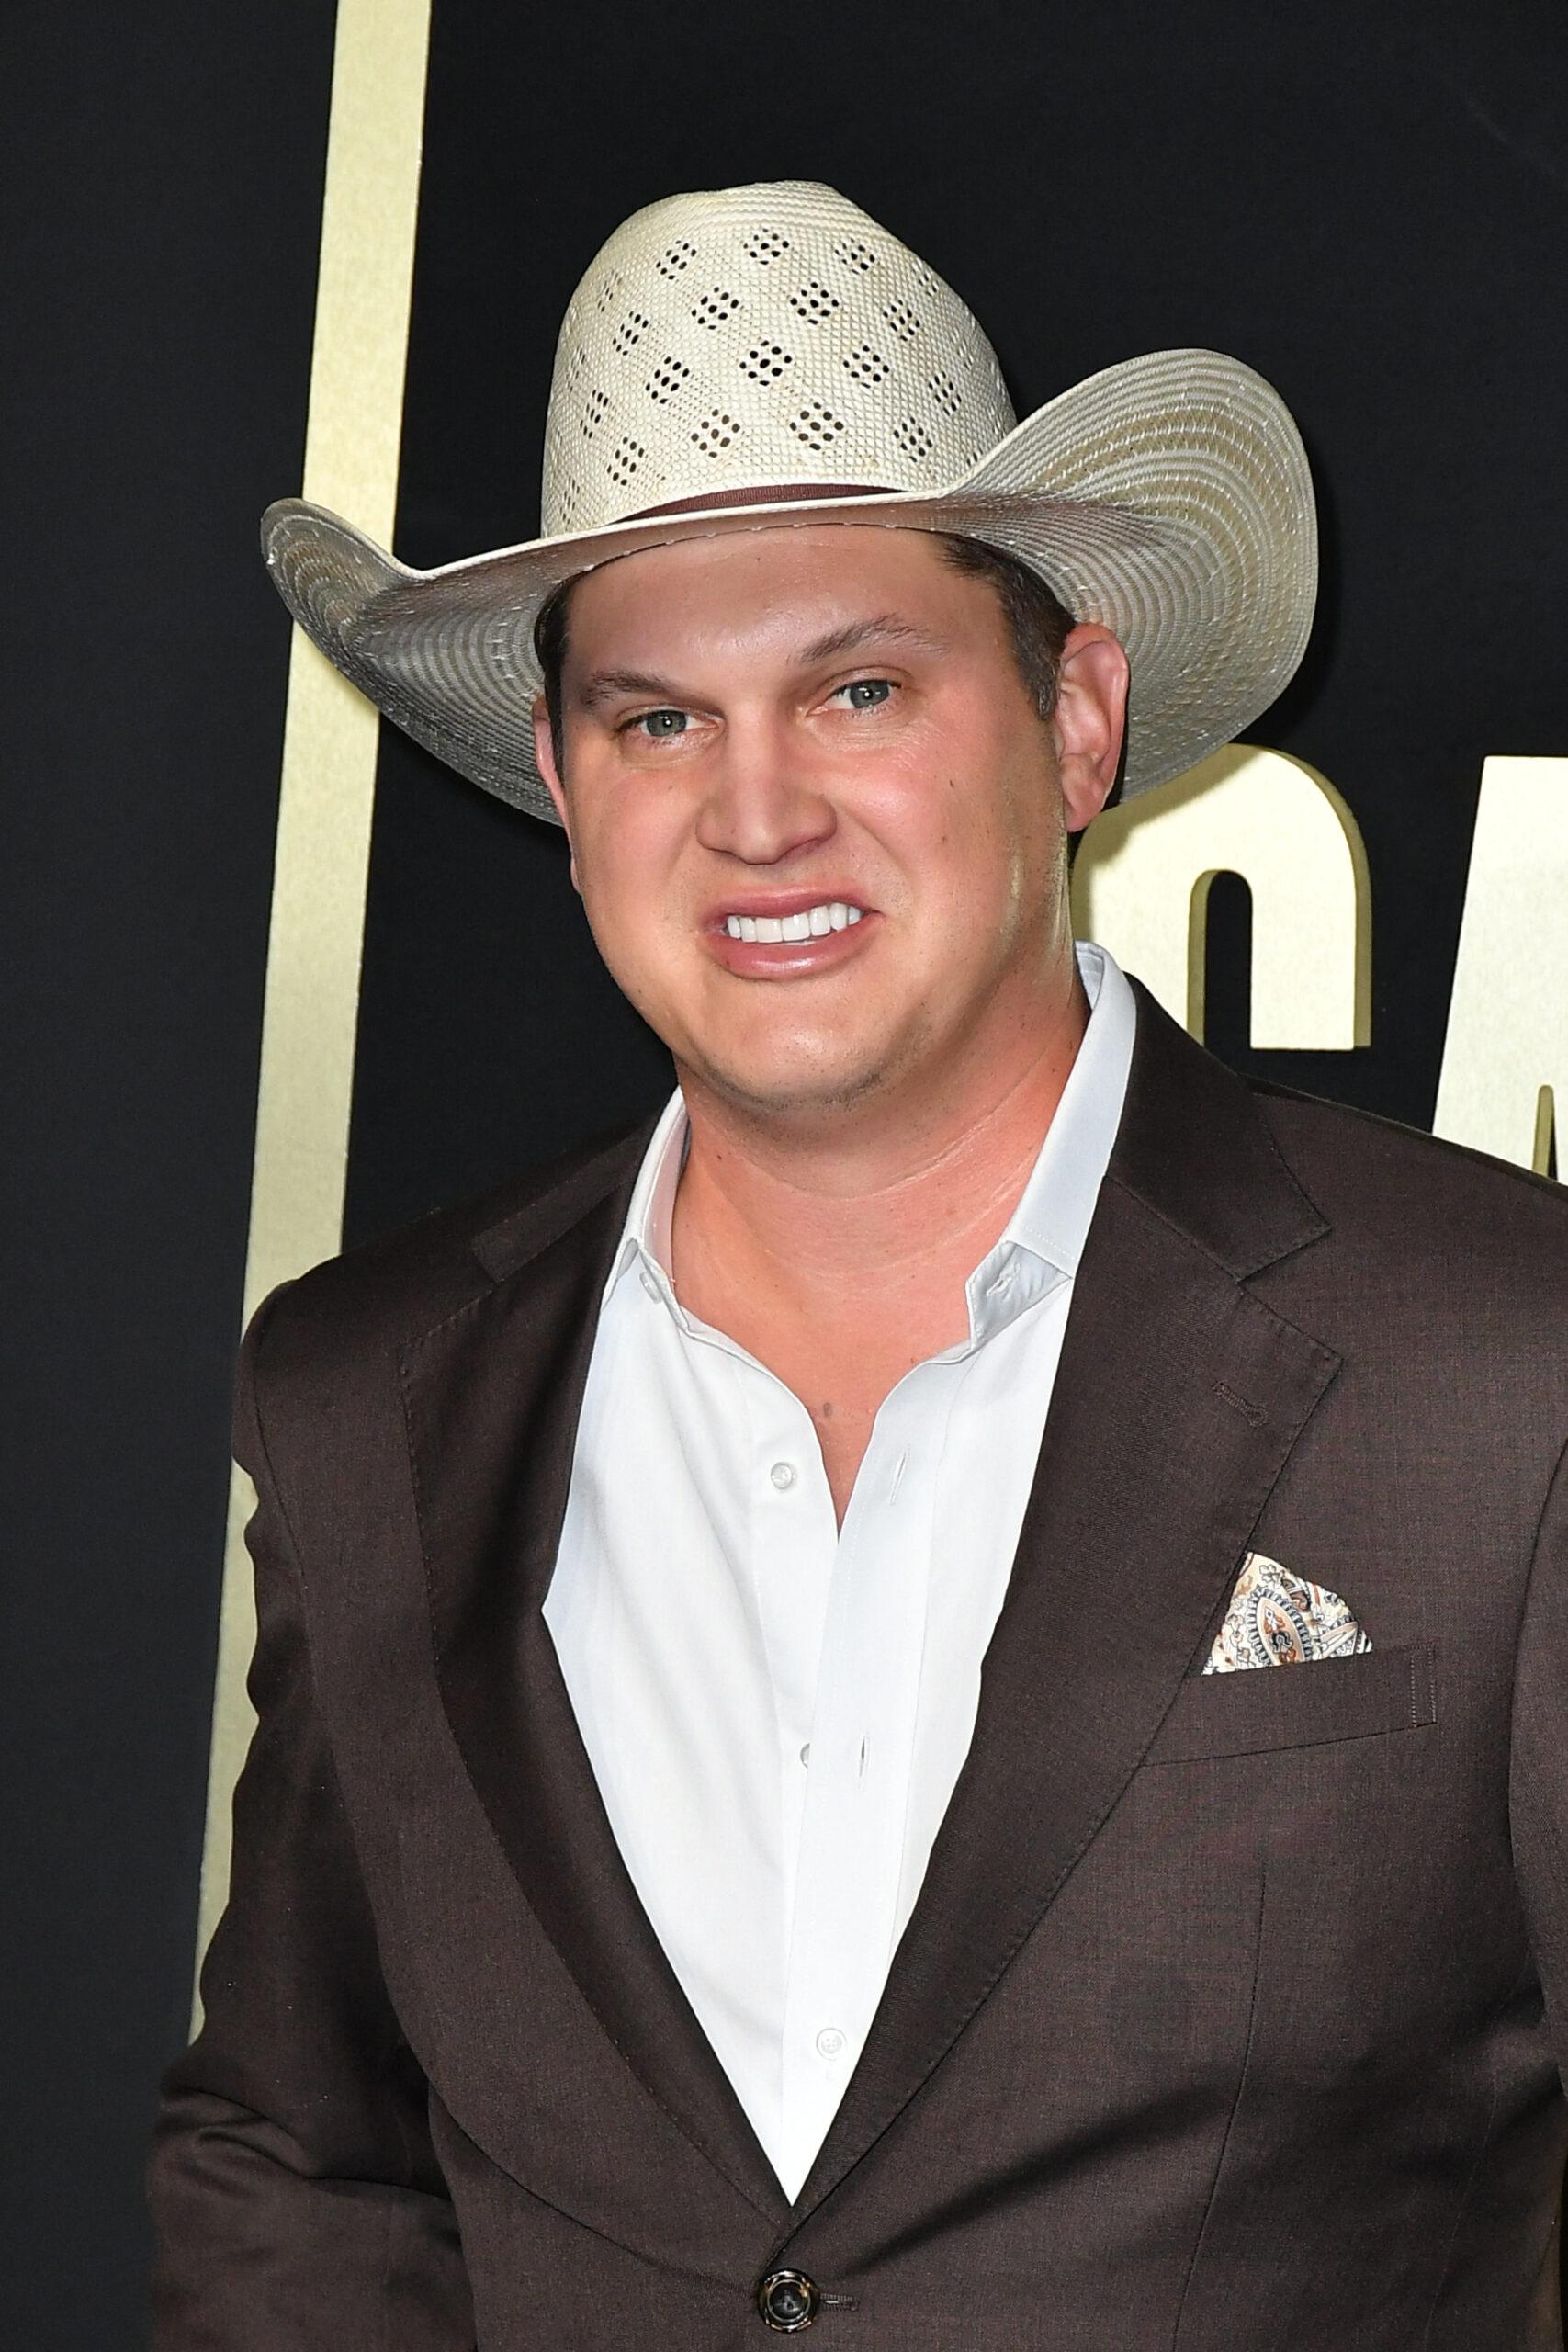 Jon Pardi attends the 58th Annual Academy of Country Music Awards